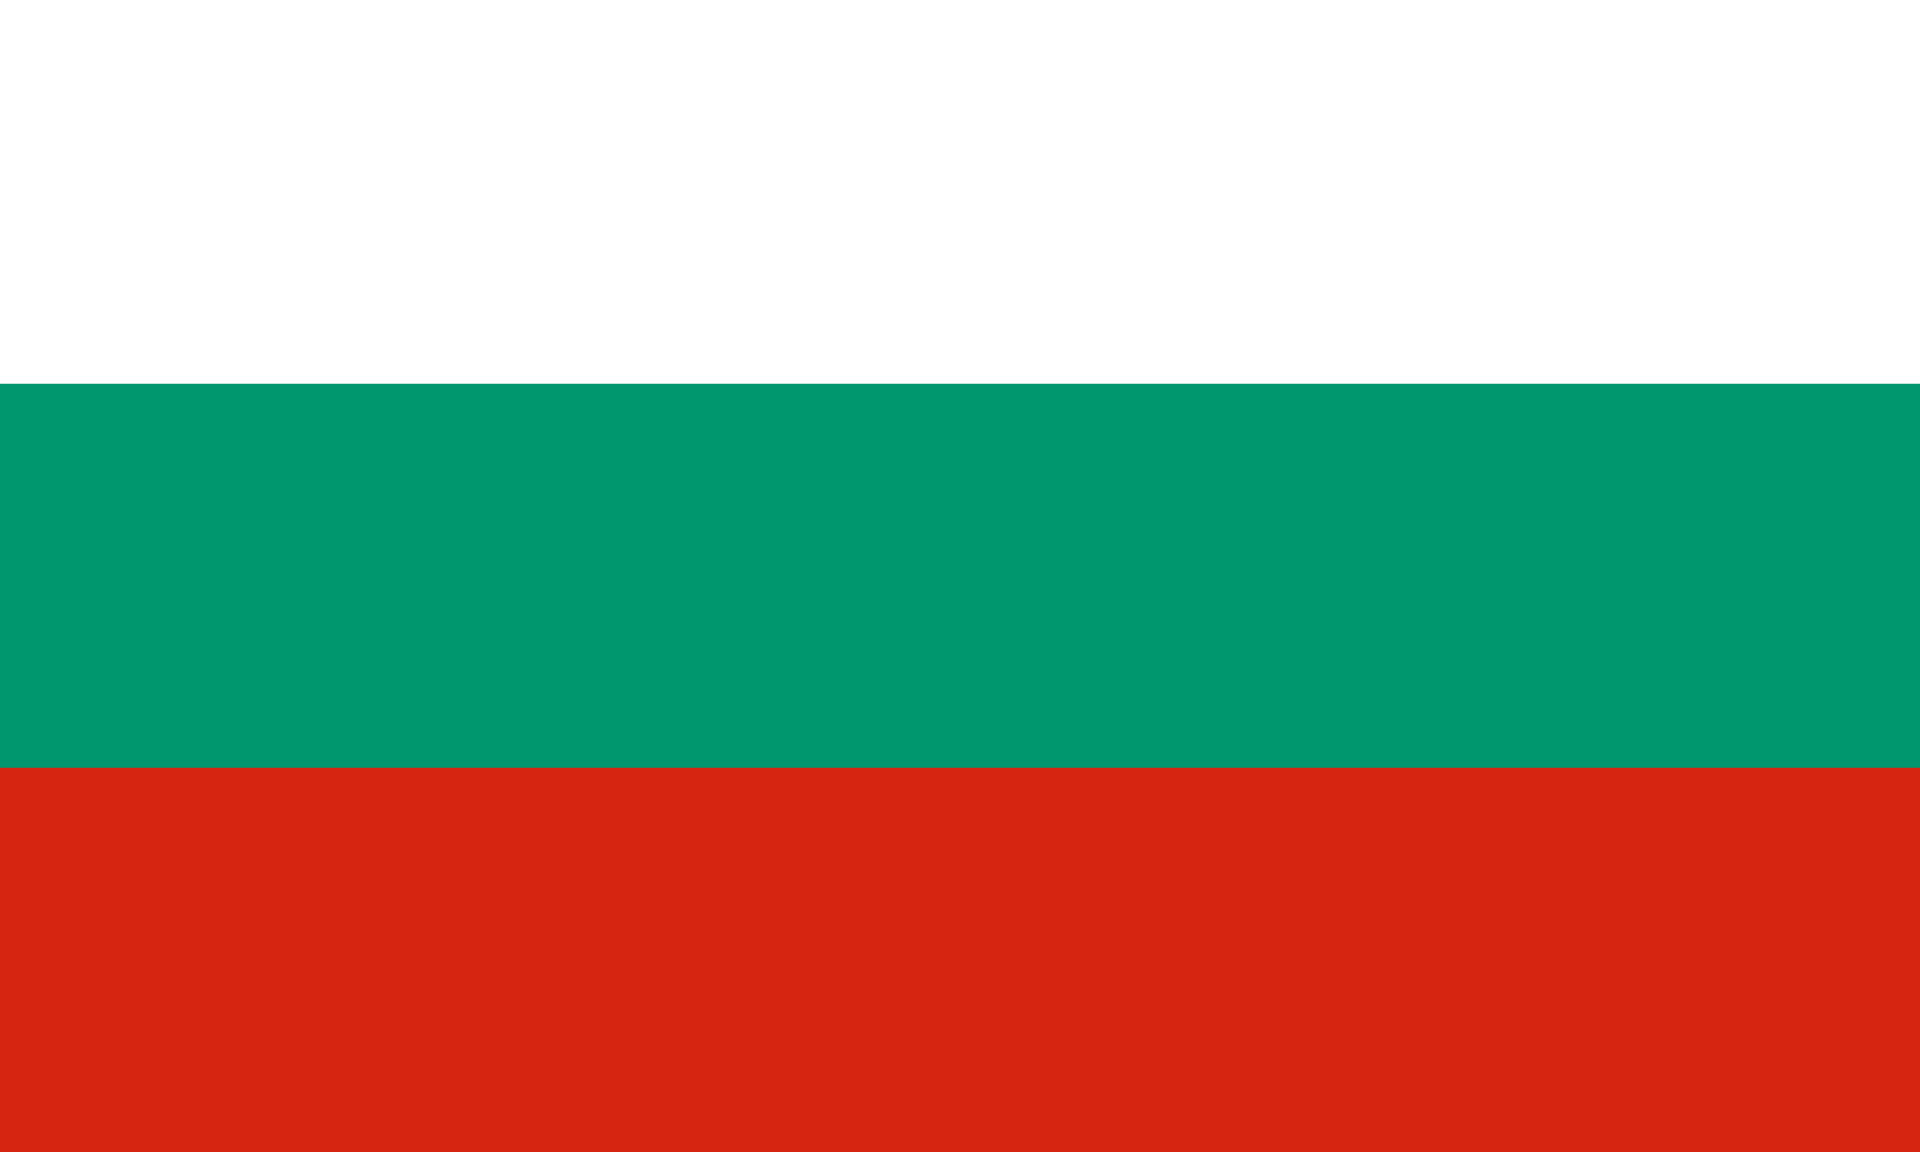 Welcoming the Bulgarian Government to Have I Been Pwned